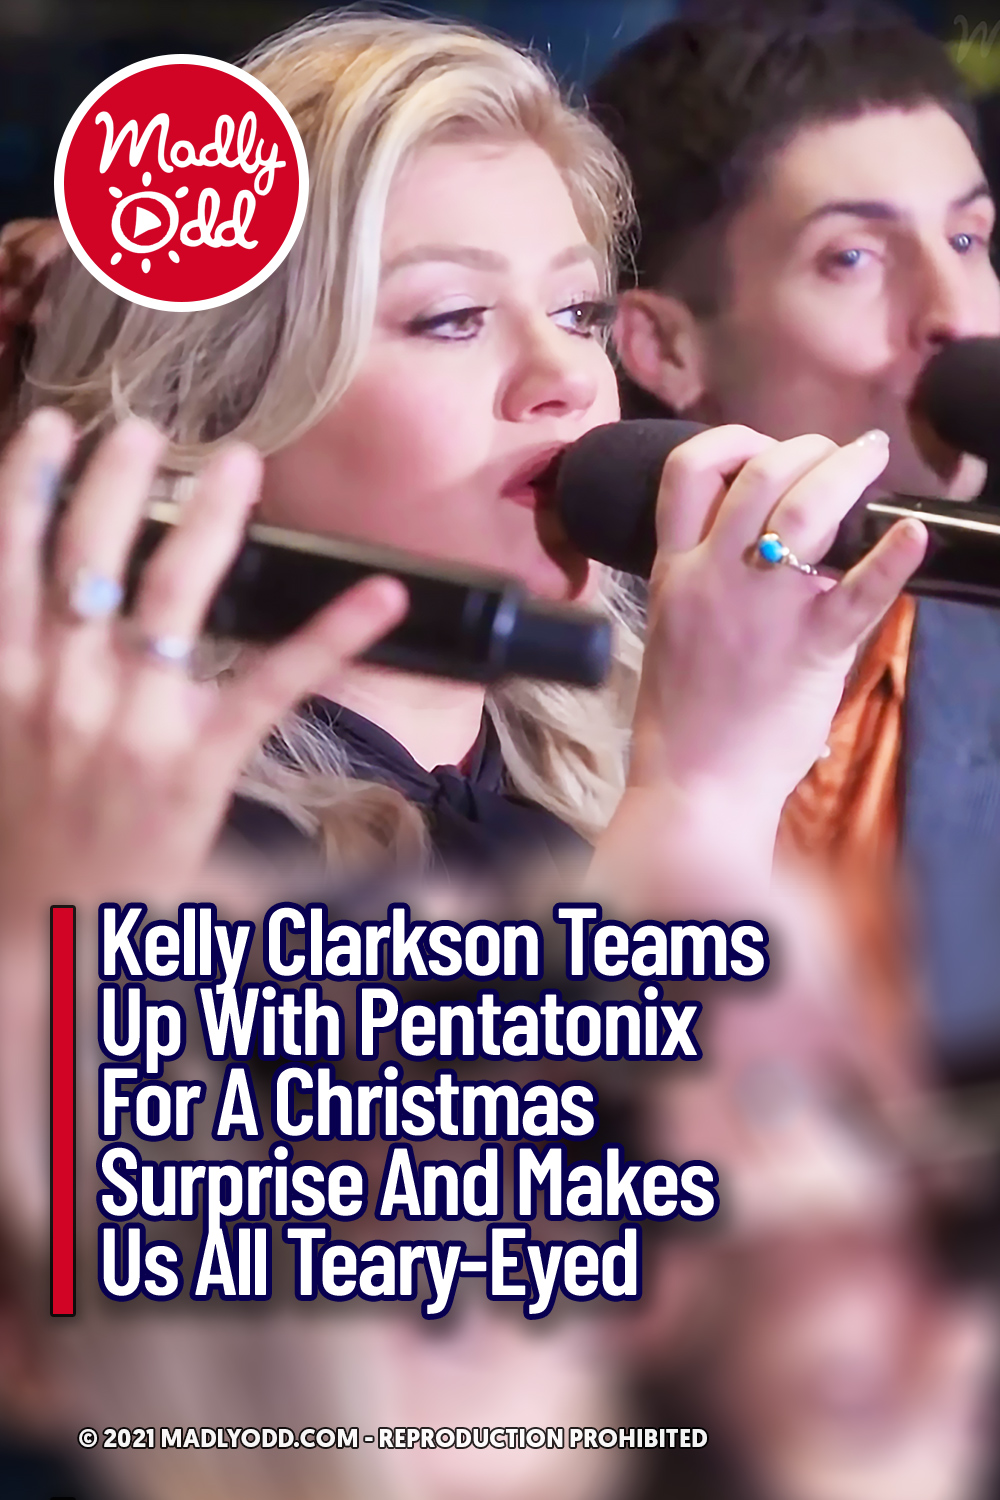 Kelly Clarkson Teams Up With Pentatonix For A Christmas Surprise And Makes Us All Teary-Eyed